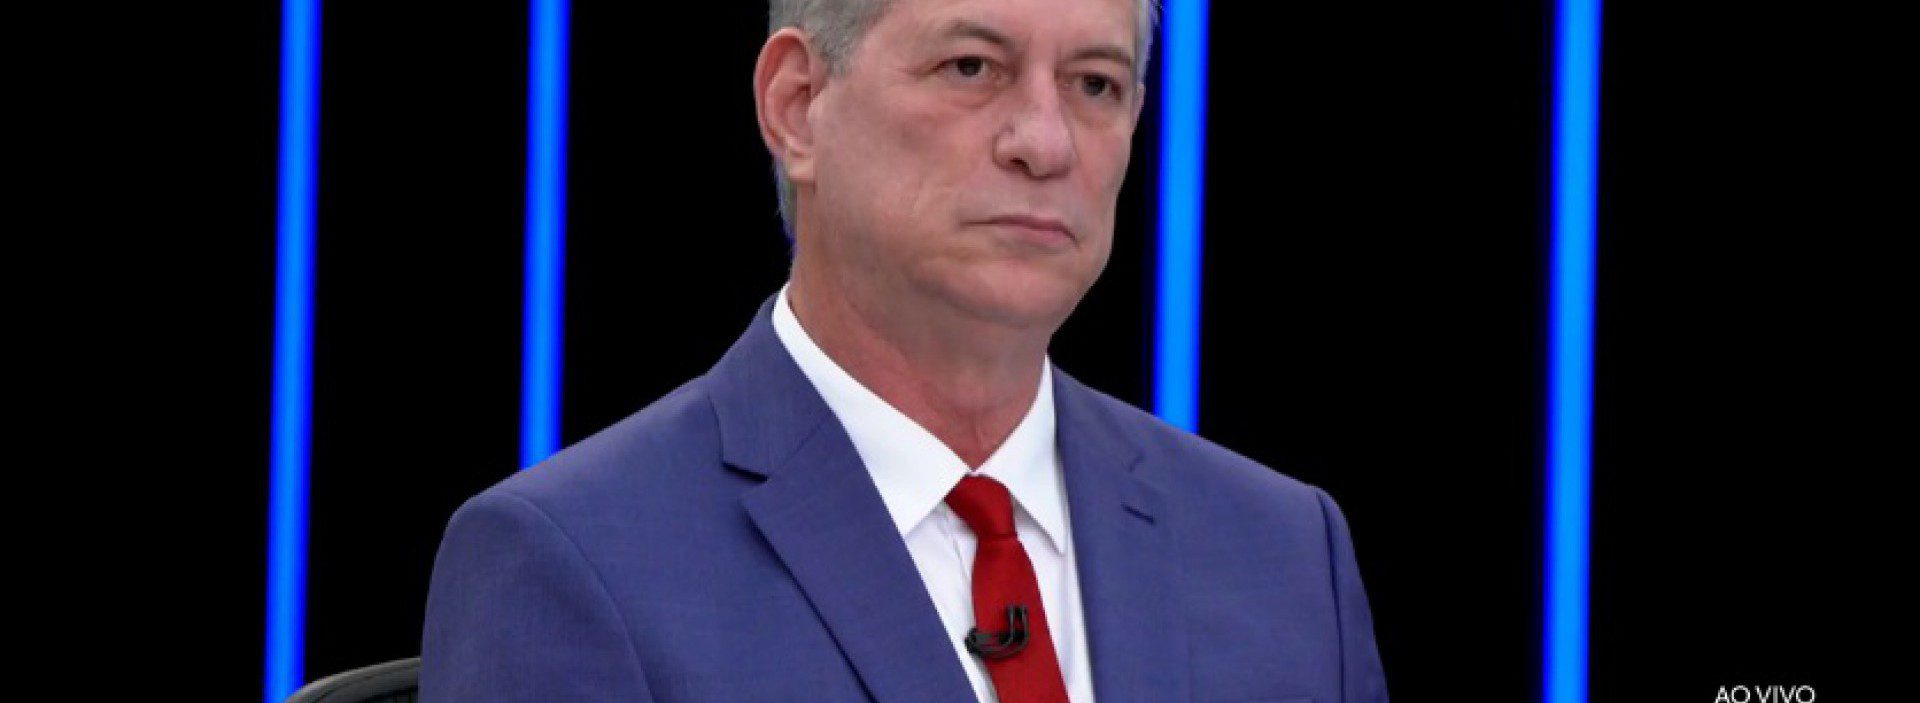 CIRO Gomes during an interview with Journal Nacional (Image: Reproduction/Globo TV)